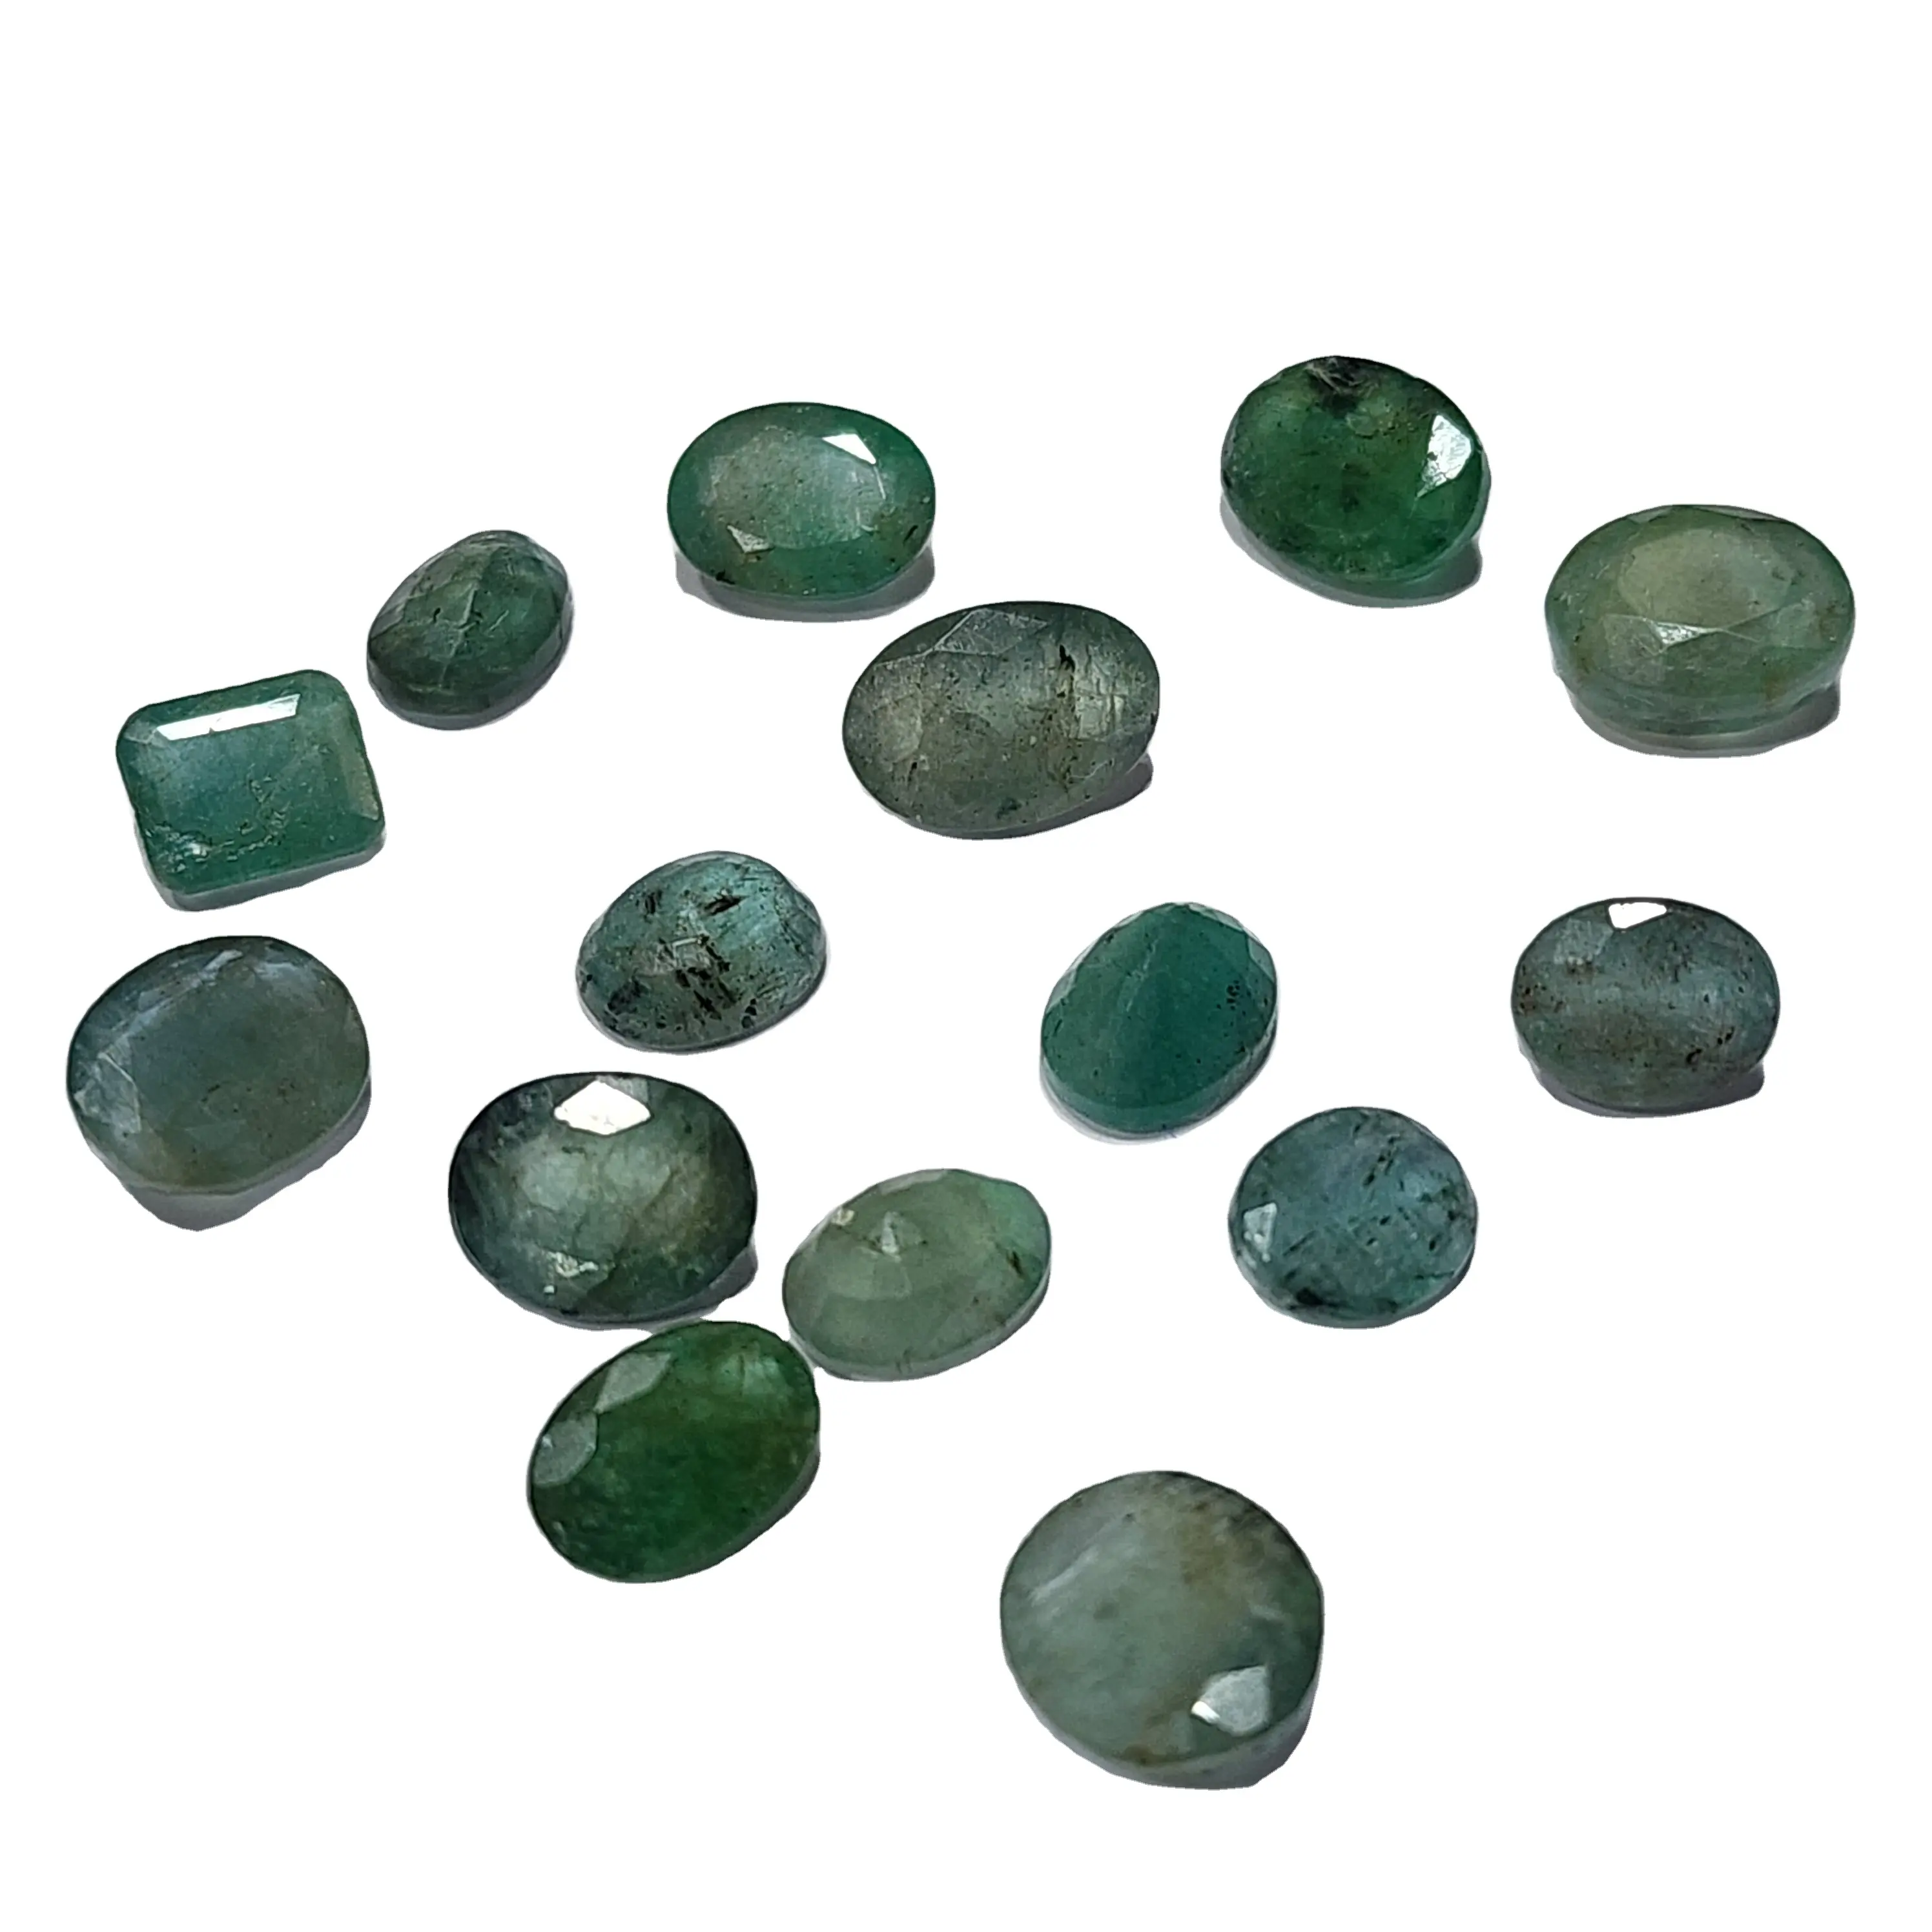 Excellent Quality Multi Shape Natural Emerald Loose Gemstones Designer Handmade Cut For Jewelry Making